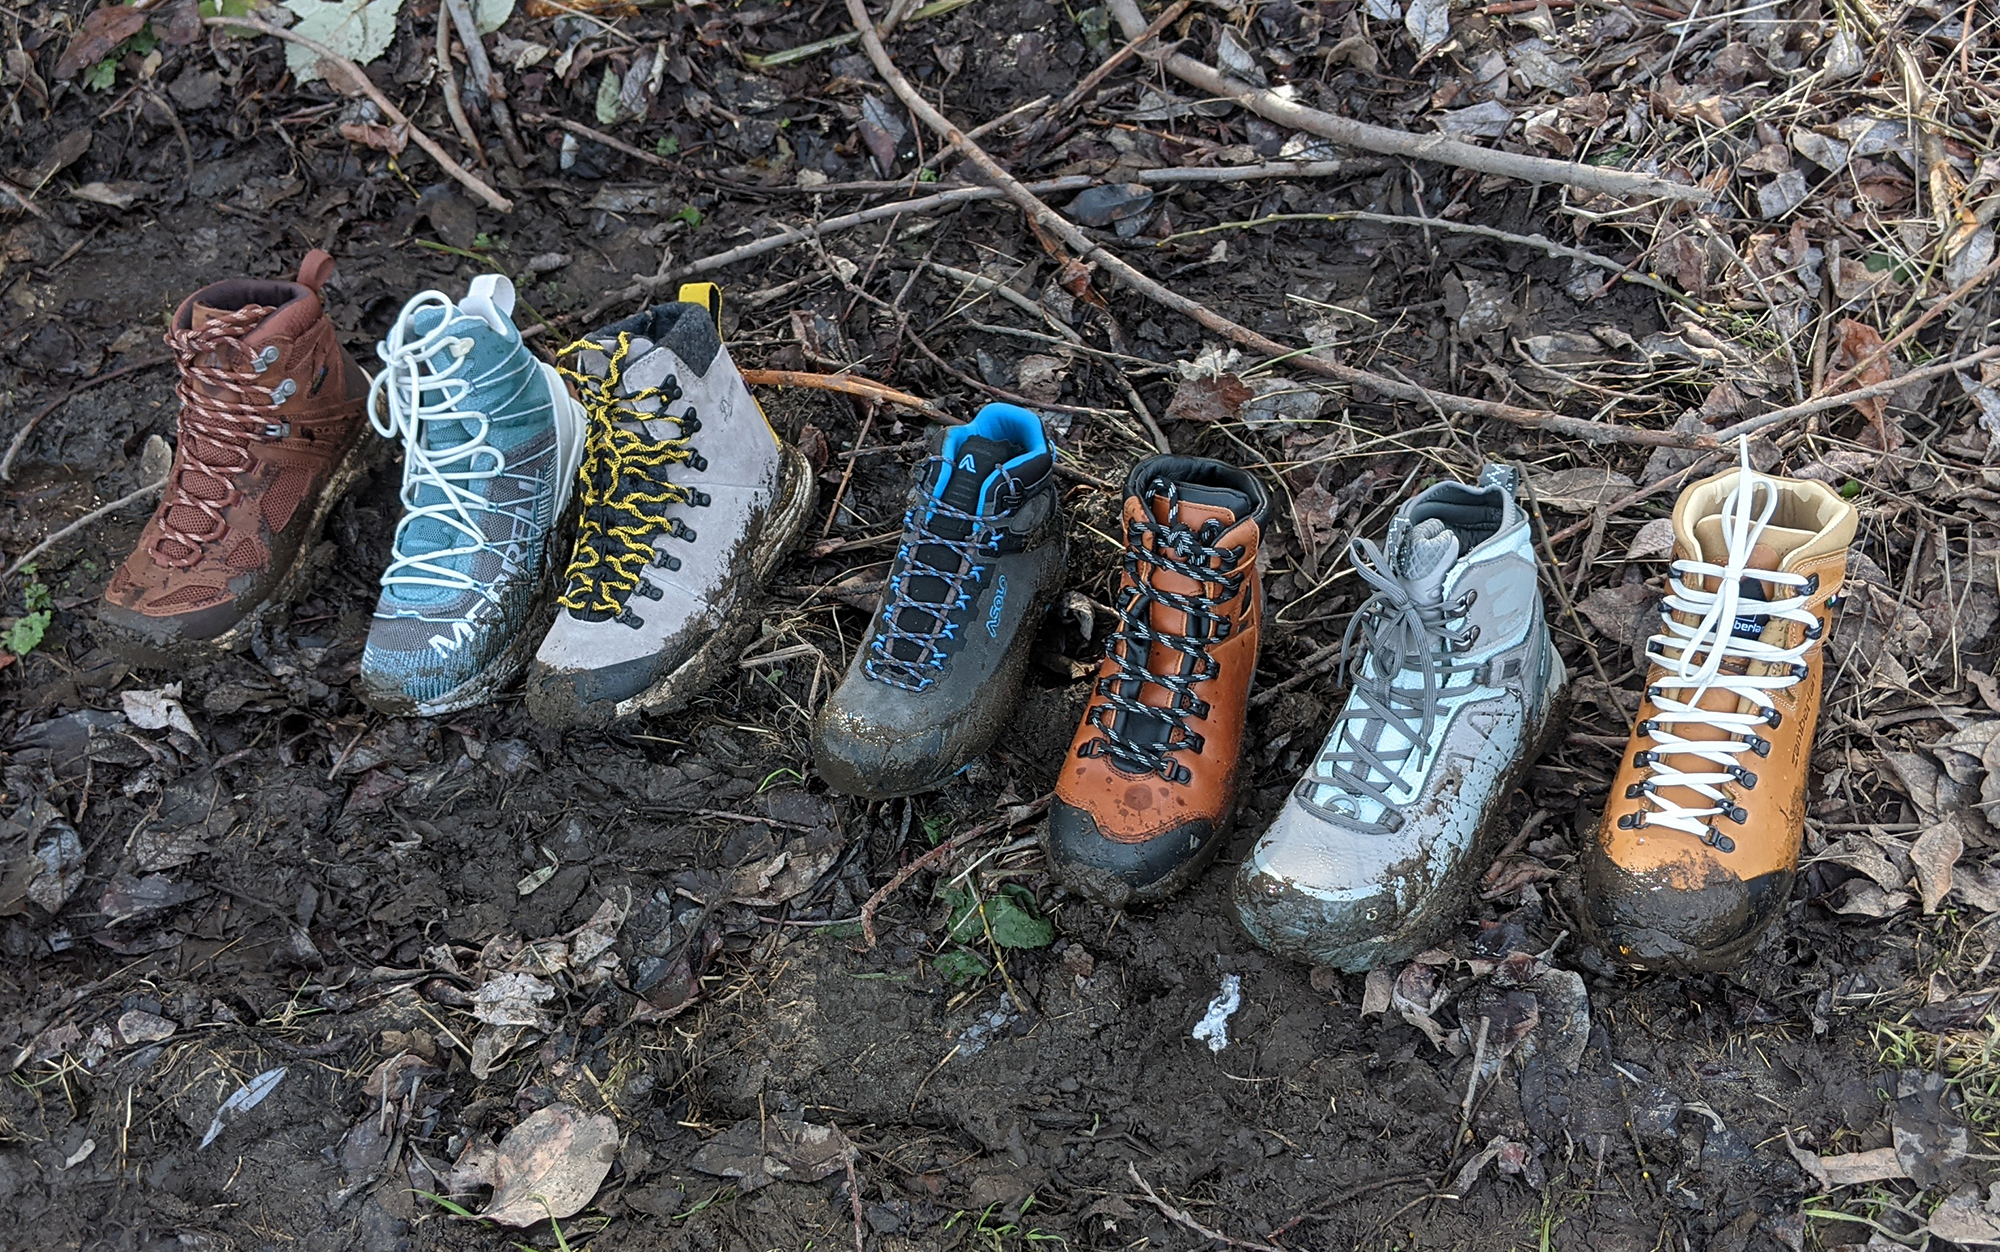 Prepping the best waterproof hiking boots for Day 2 of testing.